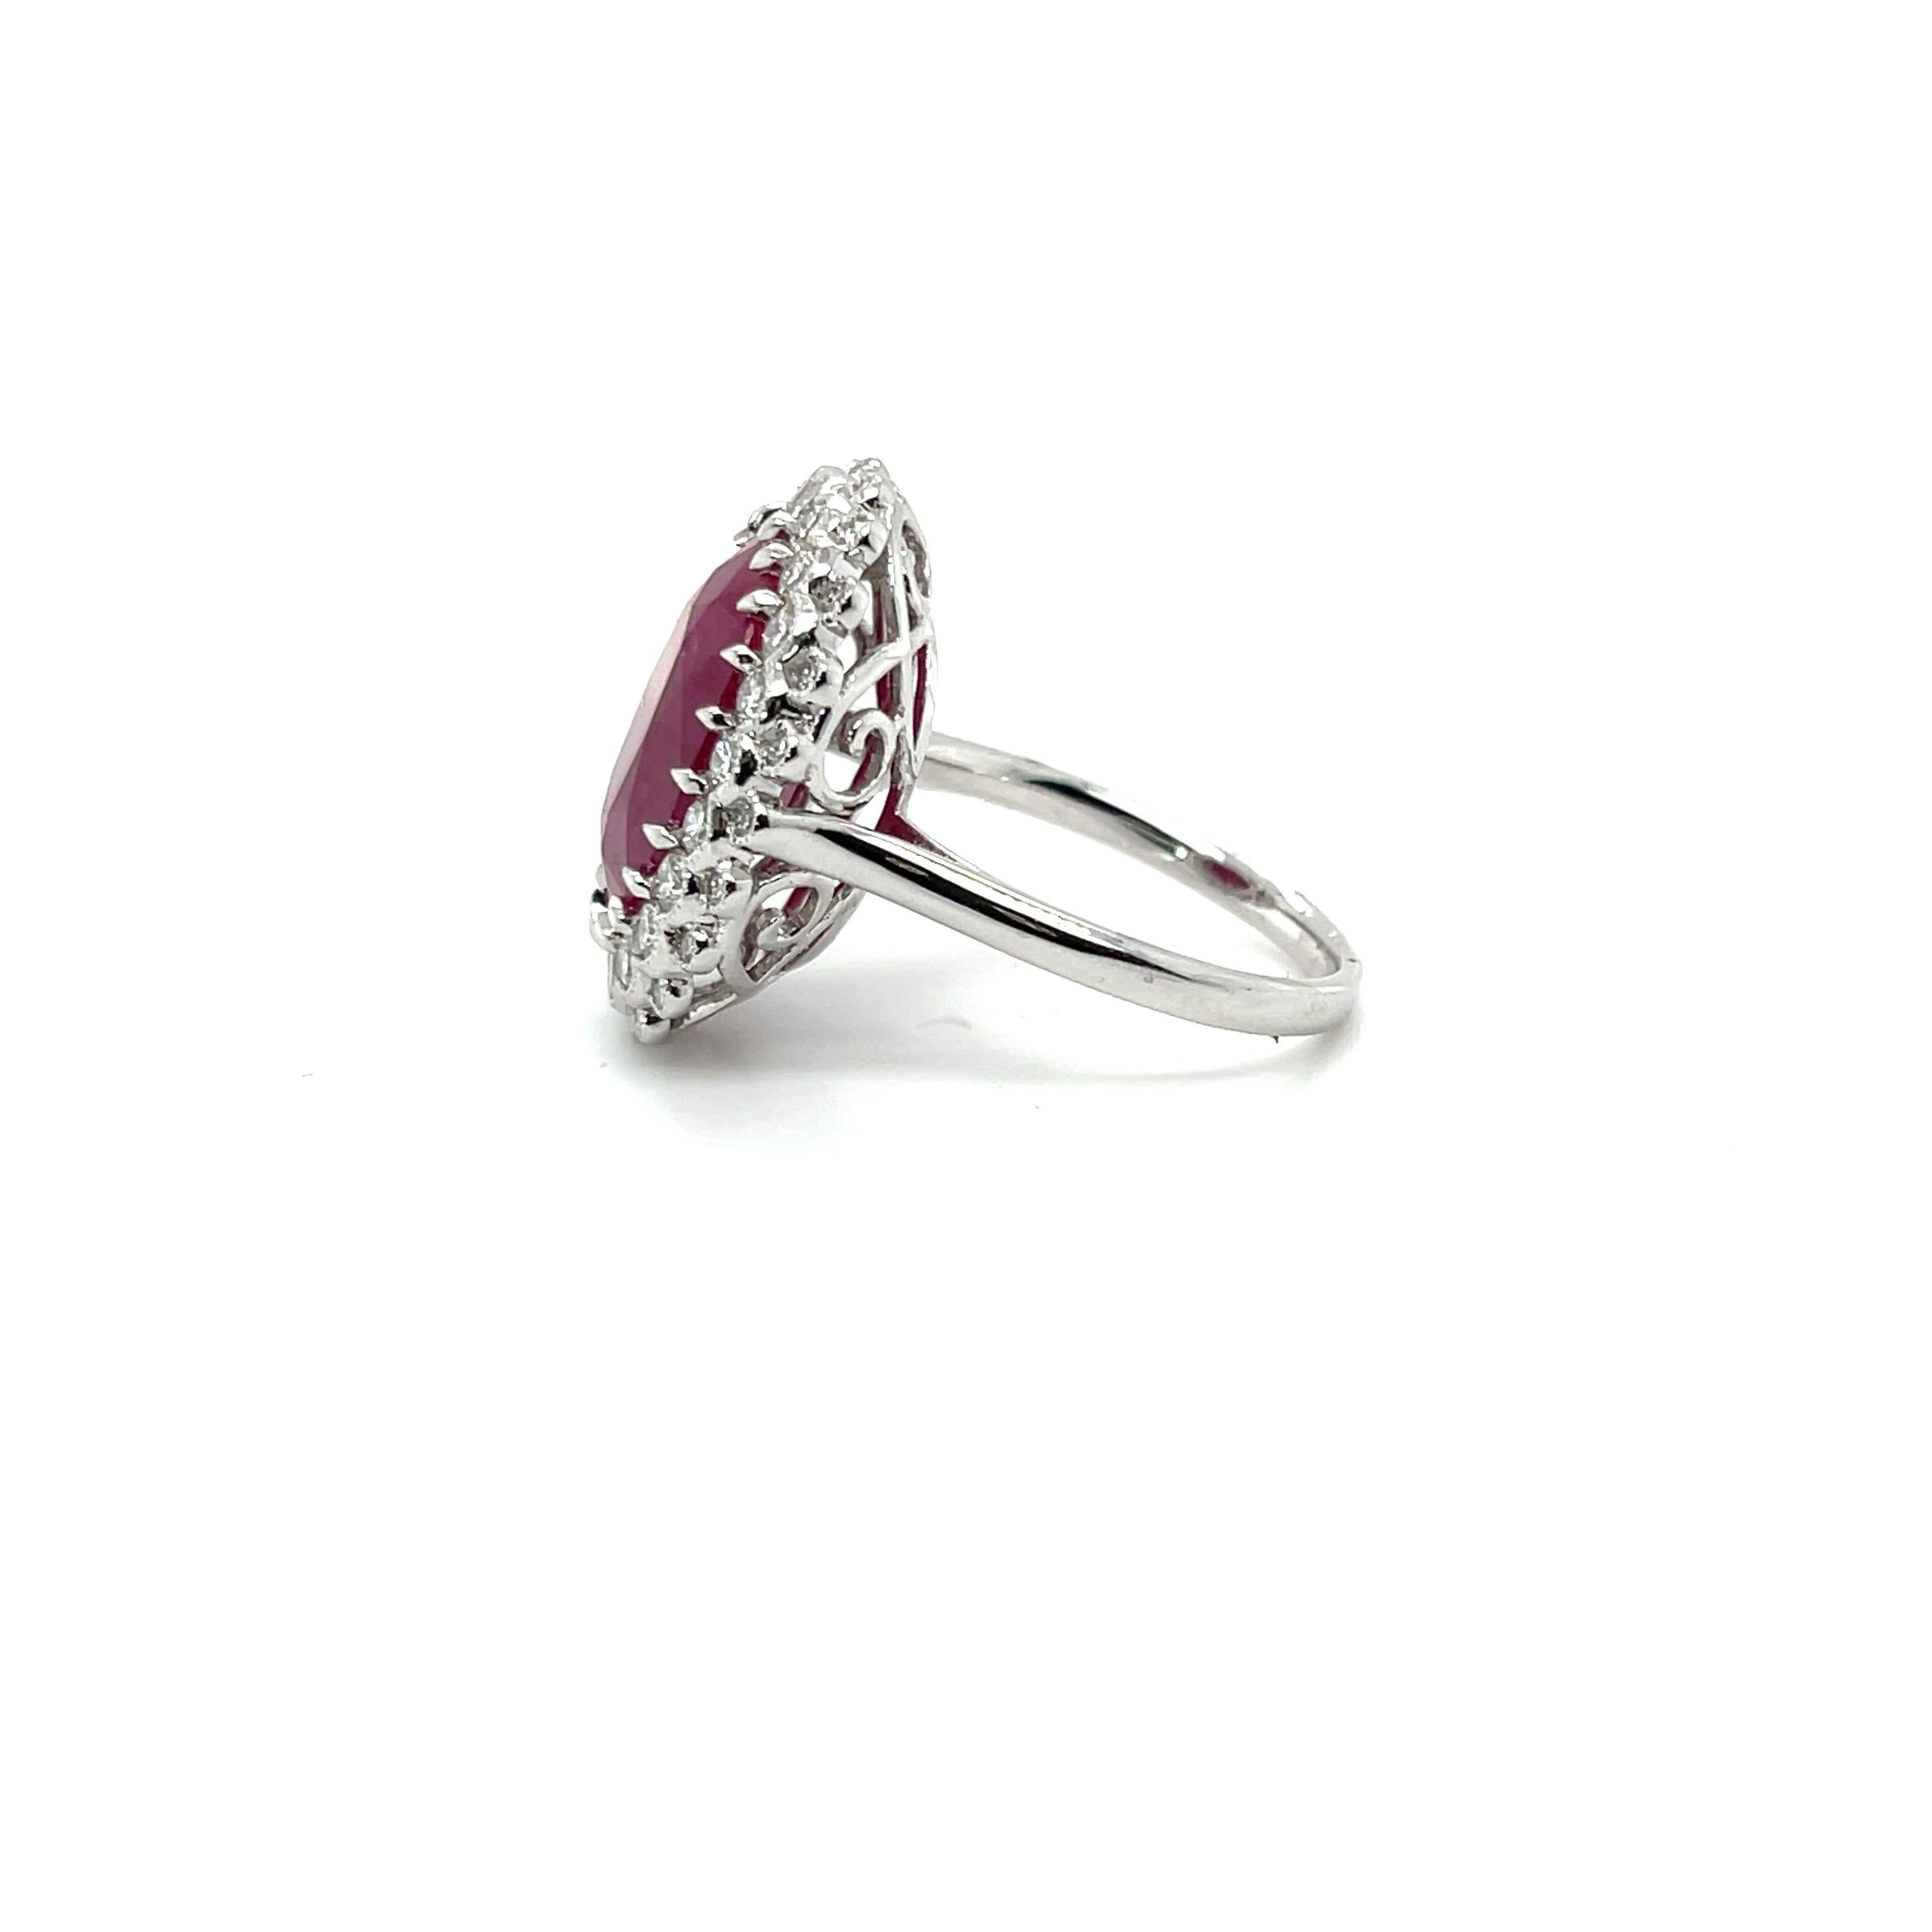 Gorgeous Ruby and Diamonds ring , beautifully crafted in platinum, featuring a double halo,  complimented by a gorgeous polished finish design. 

One ladies - platinum dress ring, narrow, half round shank with open back, multi-claw setting with